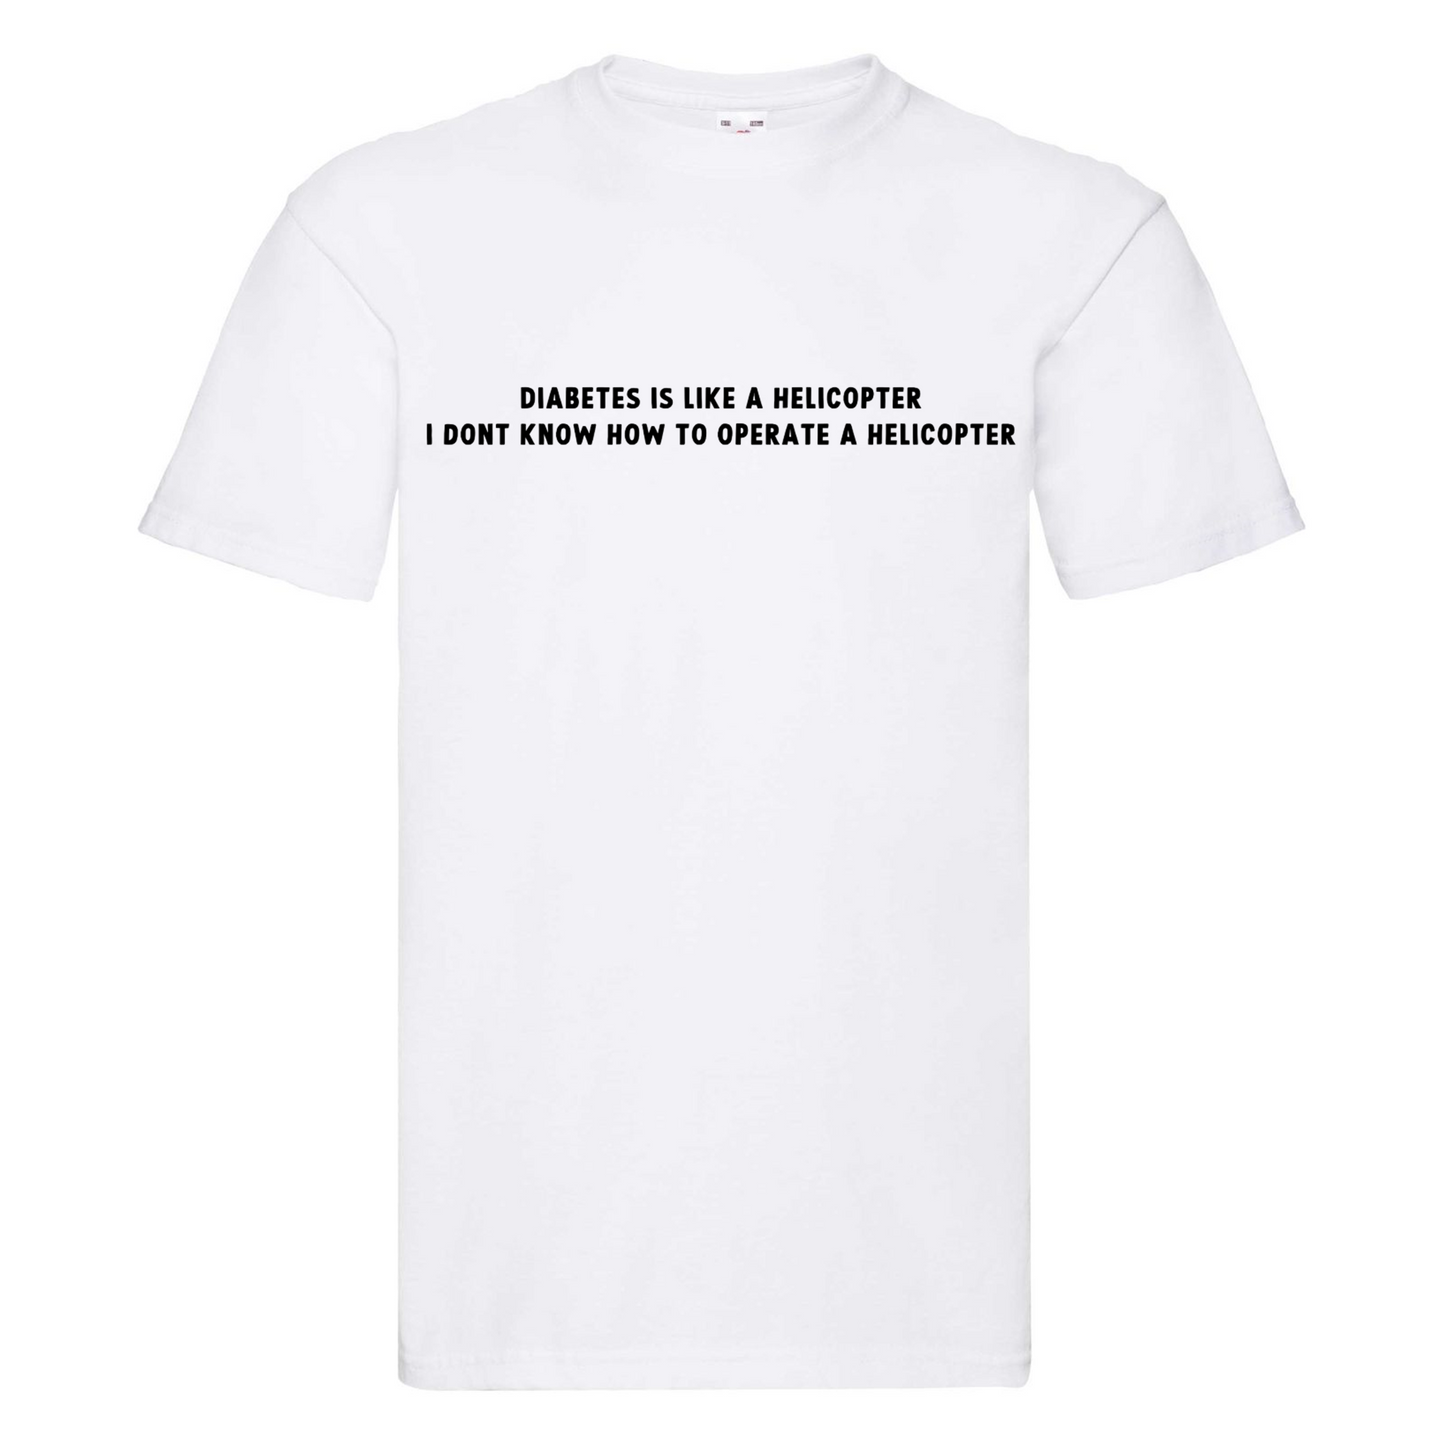 Diabetes Is Like A Helicopter, I Dont Know How To Operate A Helicopter Kids T Shirt